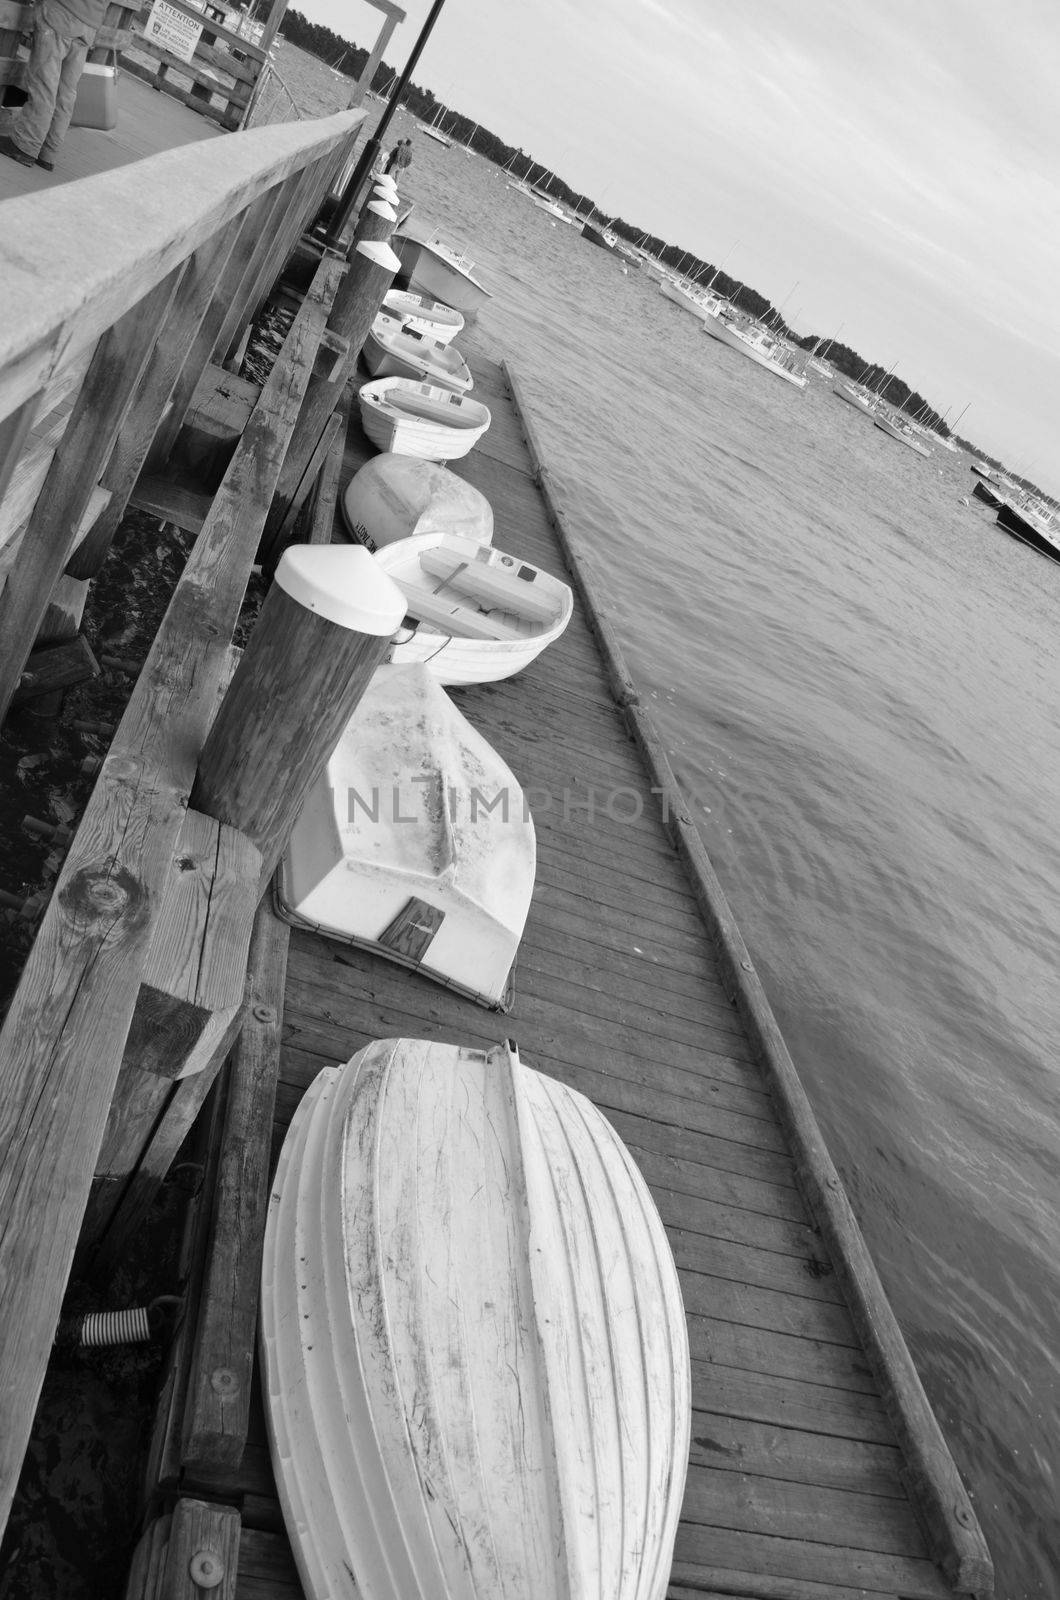 Boats along the dock in Falmouth Maine. Shown in black and white.